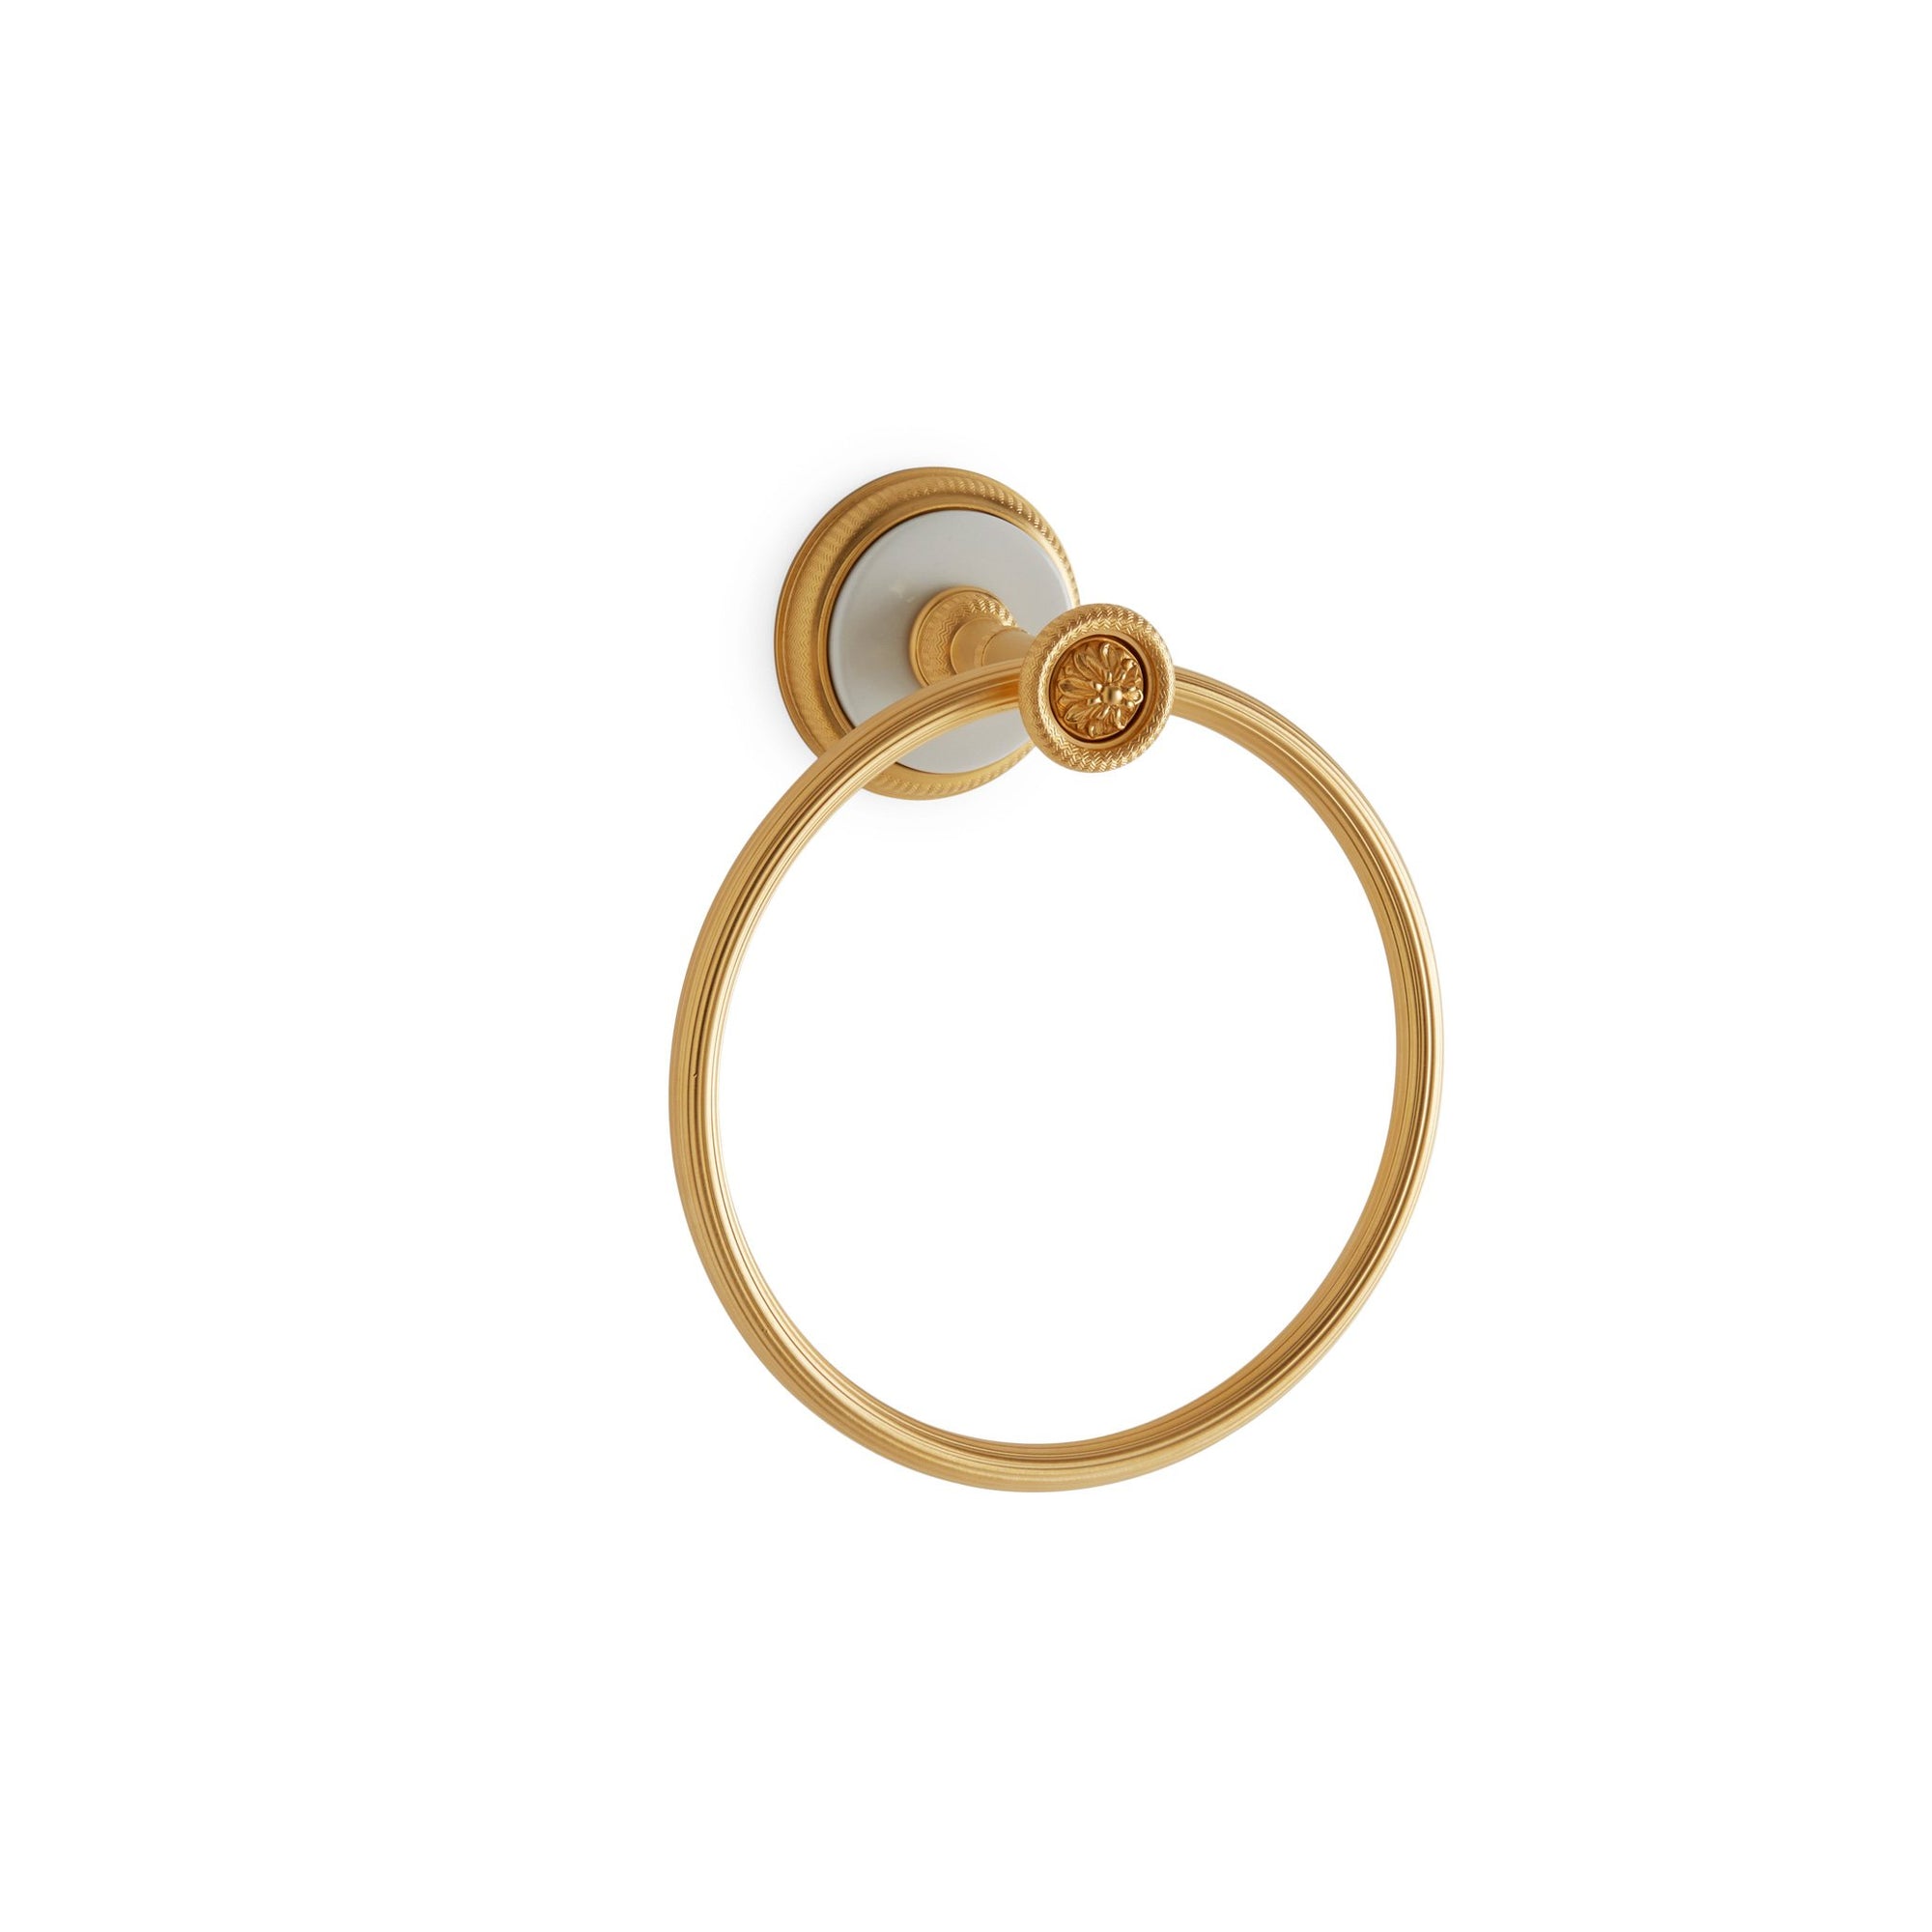 3442-WHT-GP Sherle Wagner International Knurled Towel Ring with White insert in Gold Plate metal finish